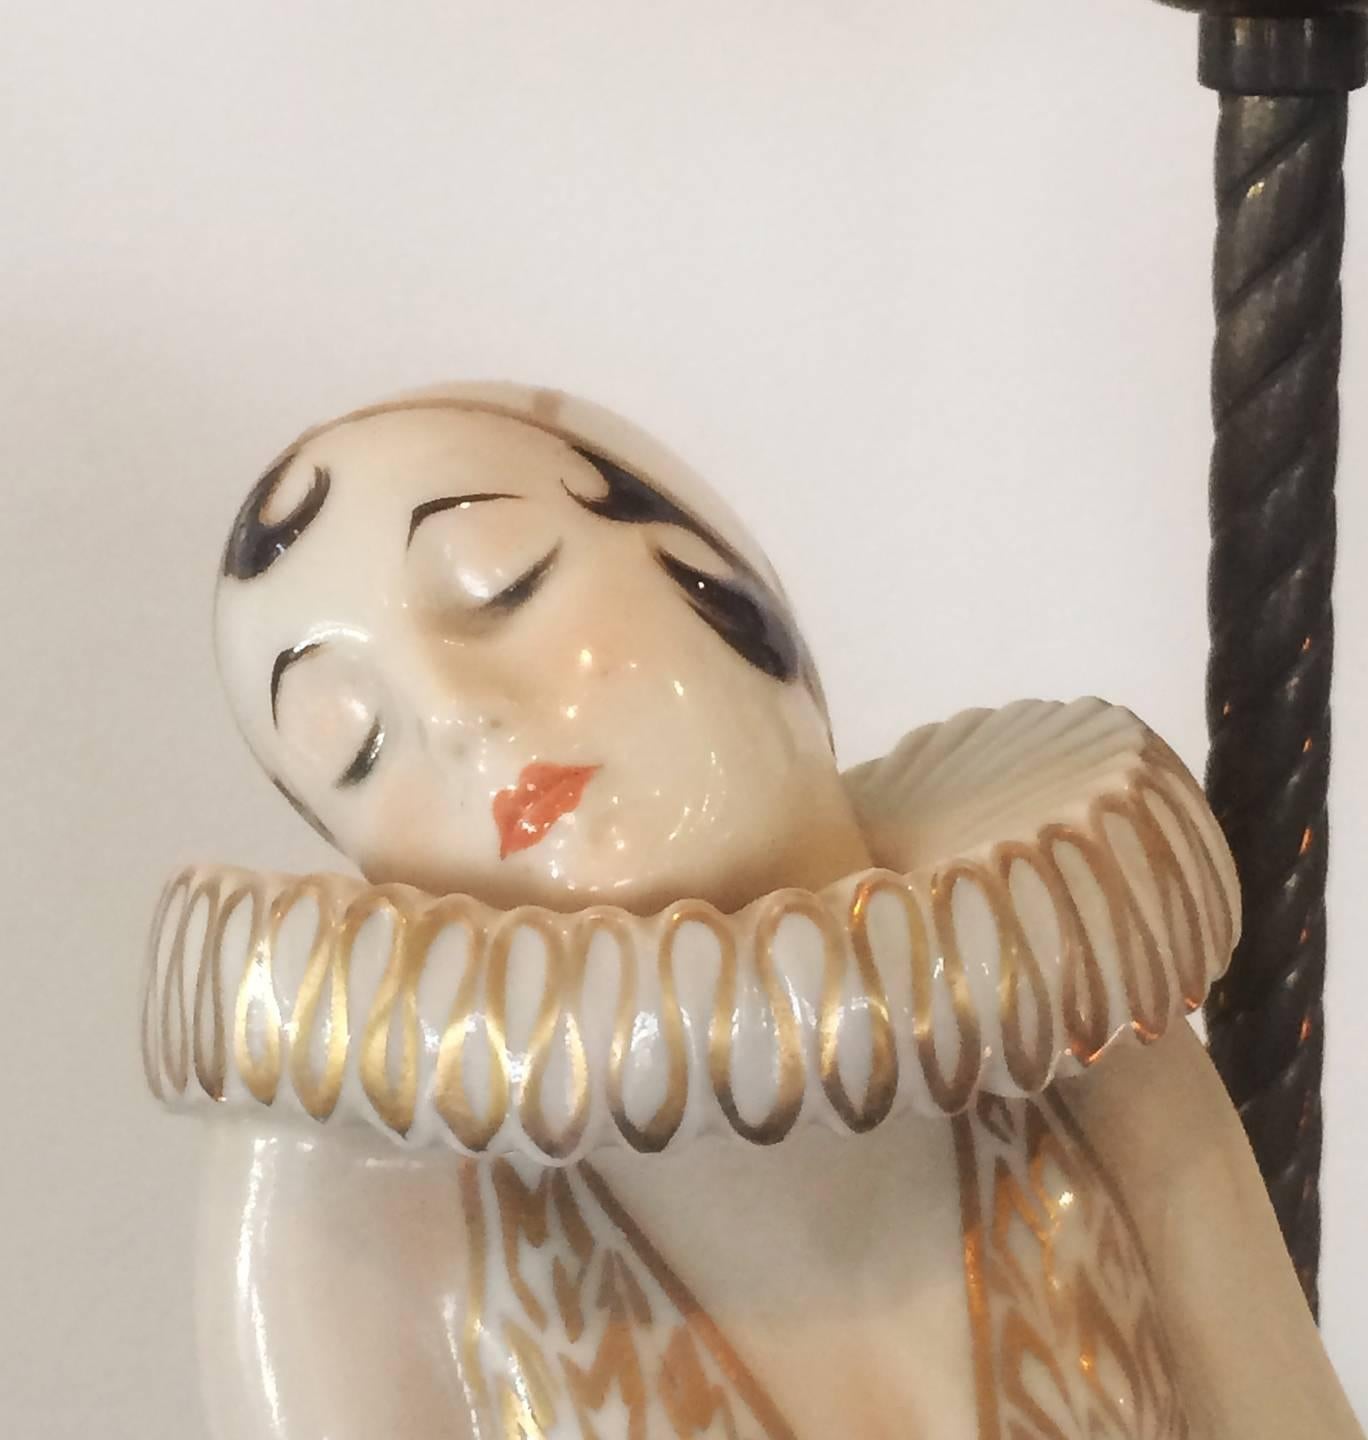 Art Deco huge Schwarzburger Werkstätten figural lamp designed by Wolfgang Schwartzkopfe, circa 1930. The figure is of Pierrot holding onto Columbine. The inside of the base has the impressed and printed Schwarzburger Werkstätten marks and outside